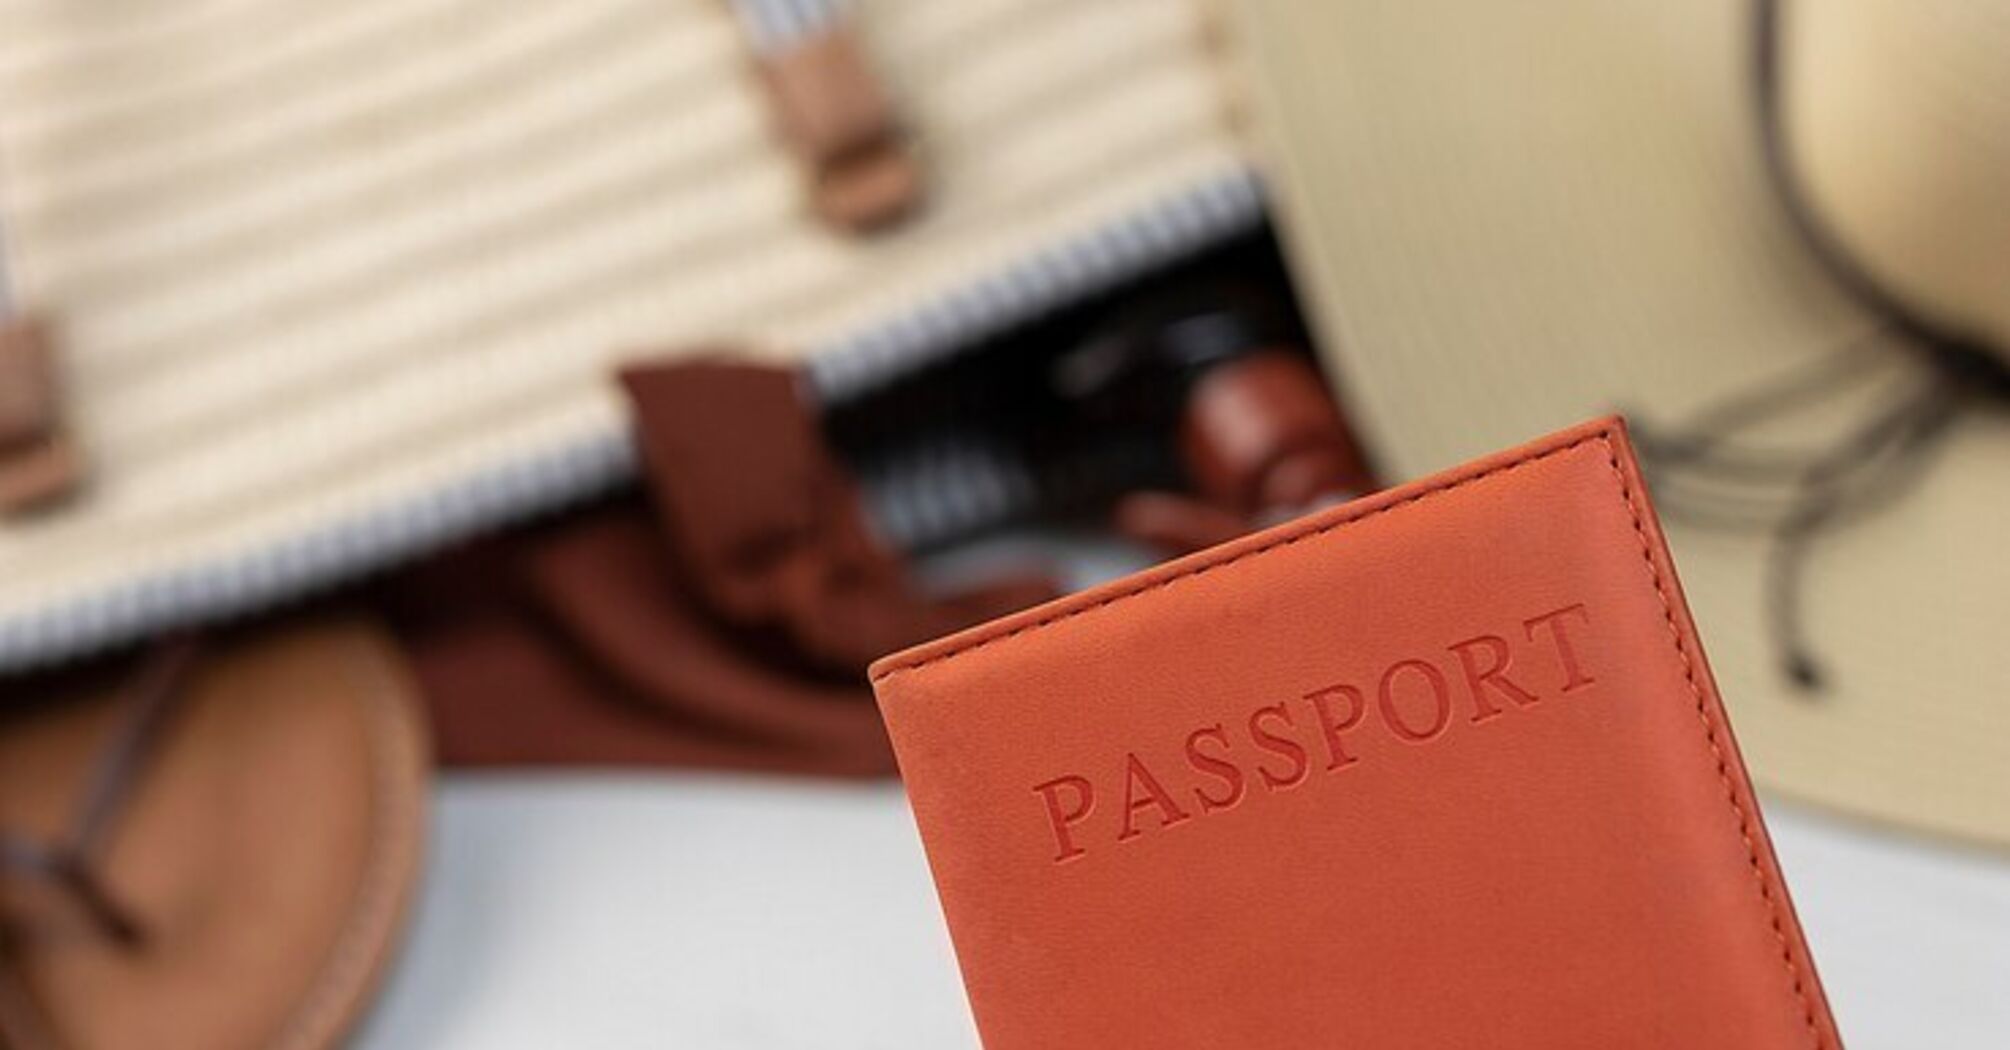 The most powerful passports in the world have been announced